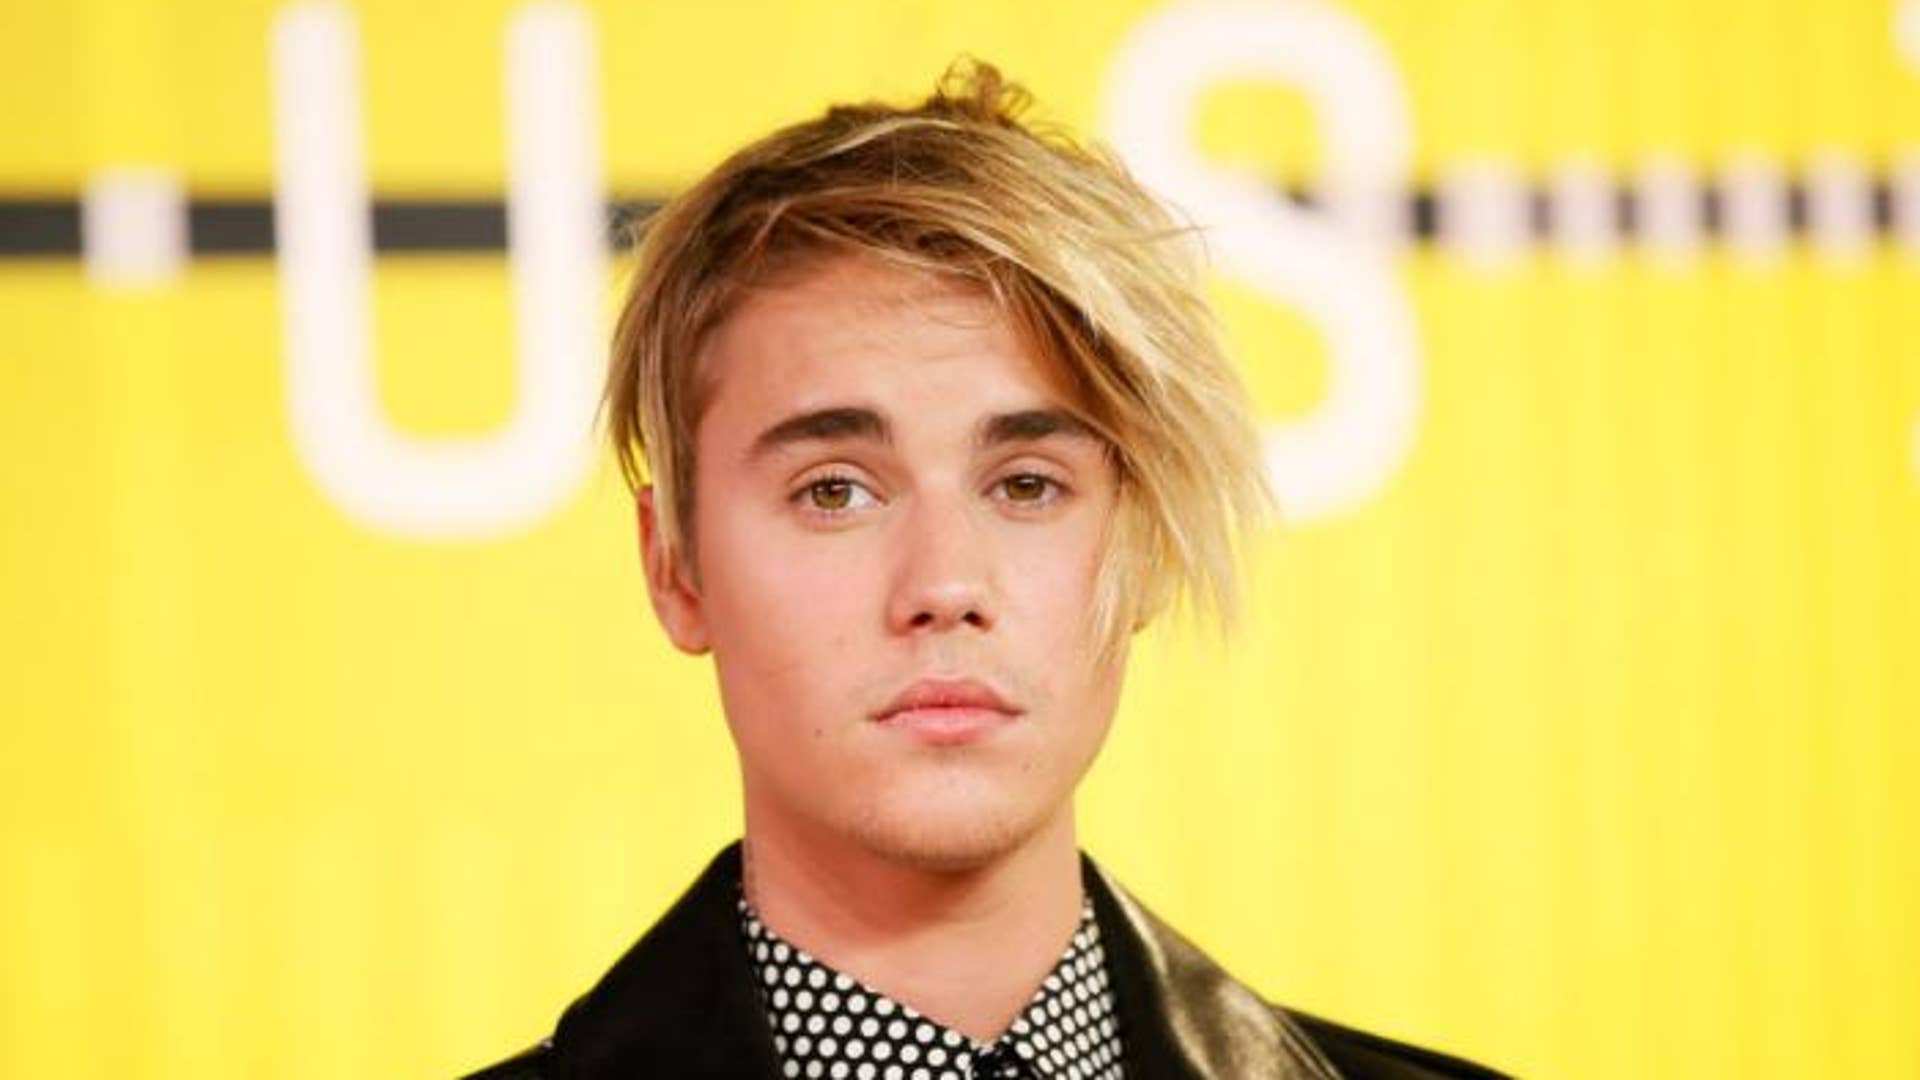 Justin Bieber Hairstyle 2015 Tutorial - video Dailymotion